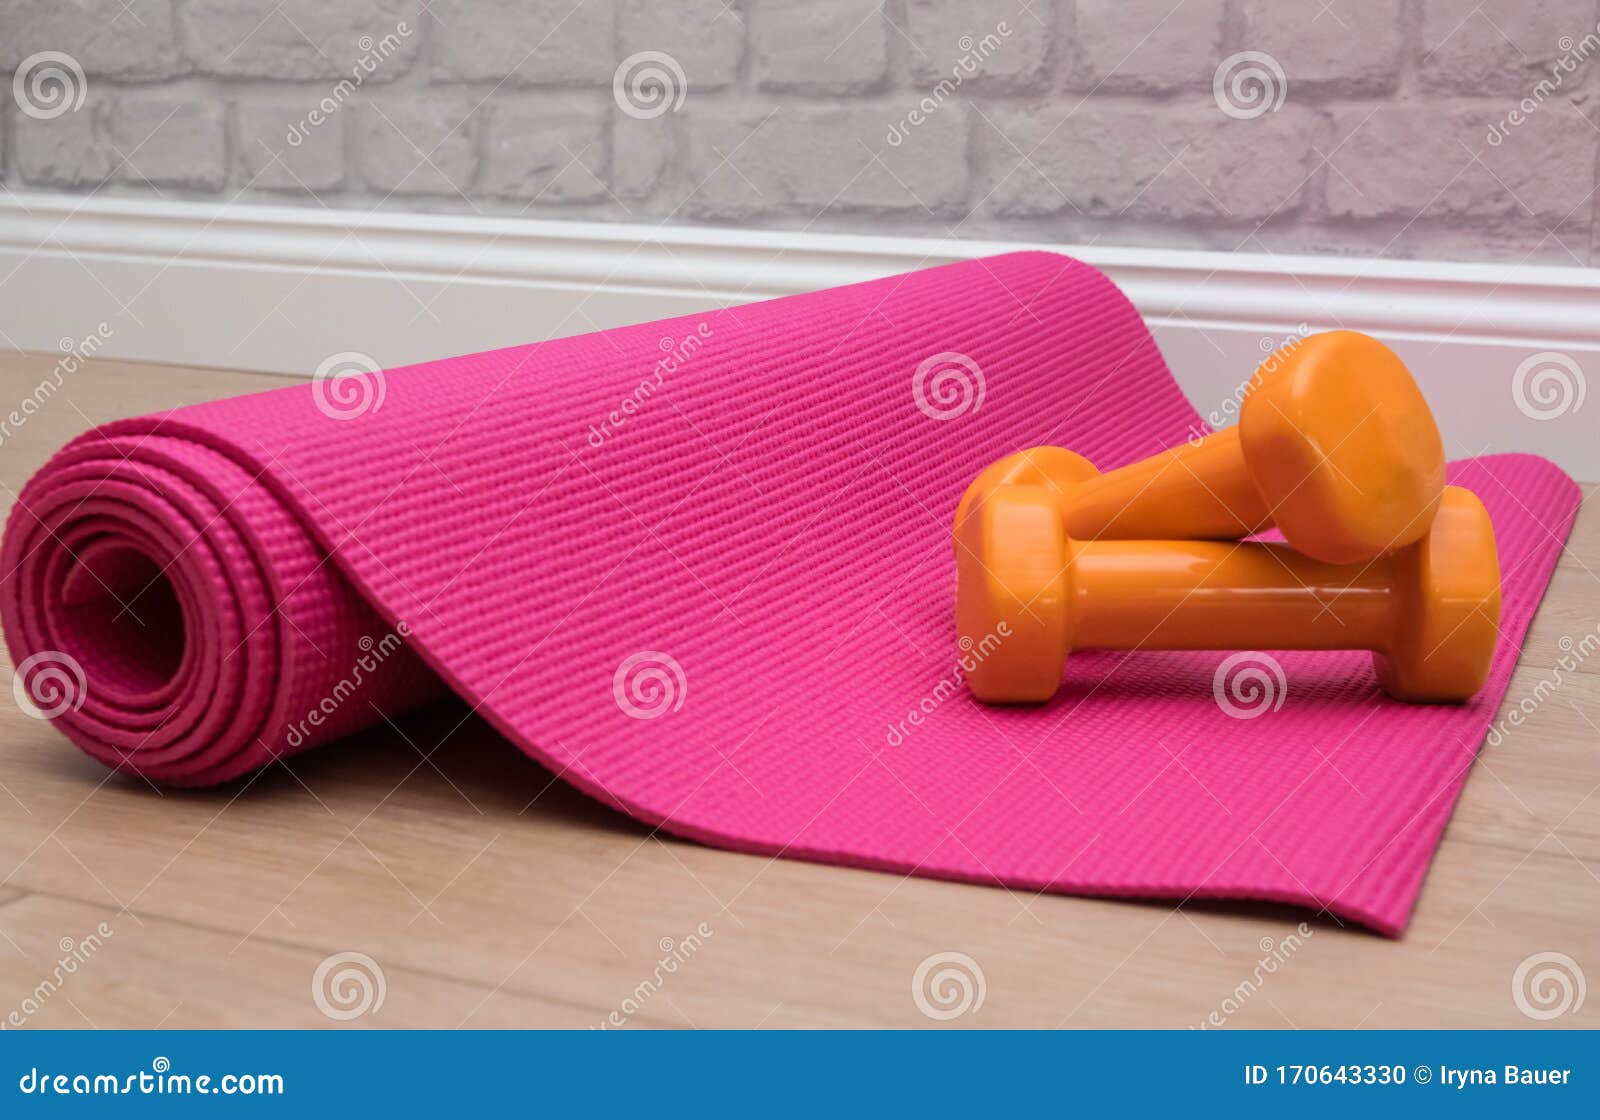 Two Dumbbells for Sport on the Pink Yoga Mat Stock Photo - Image of ...